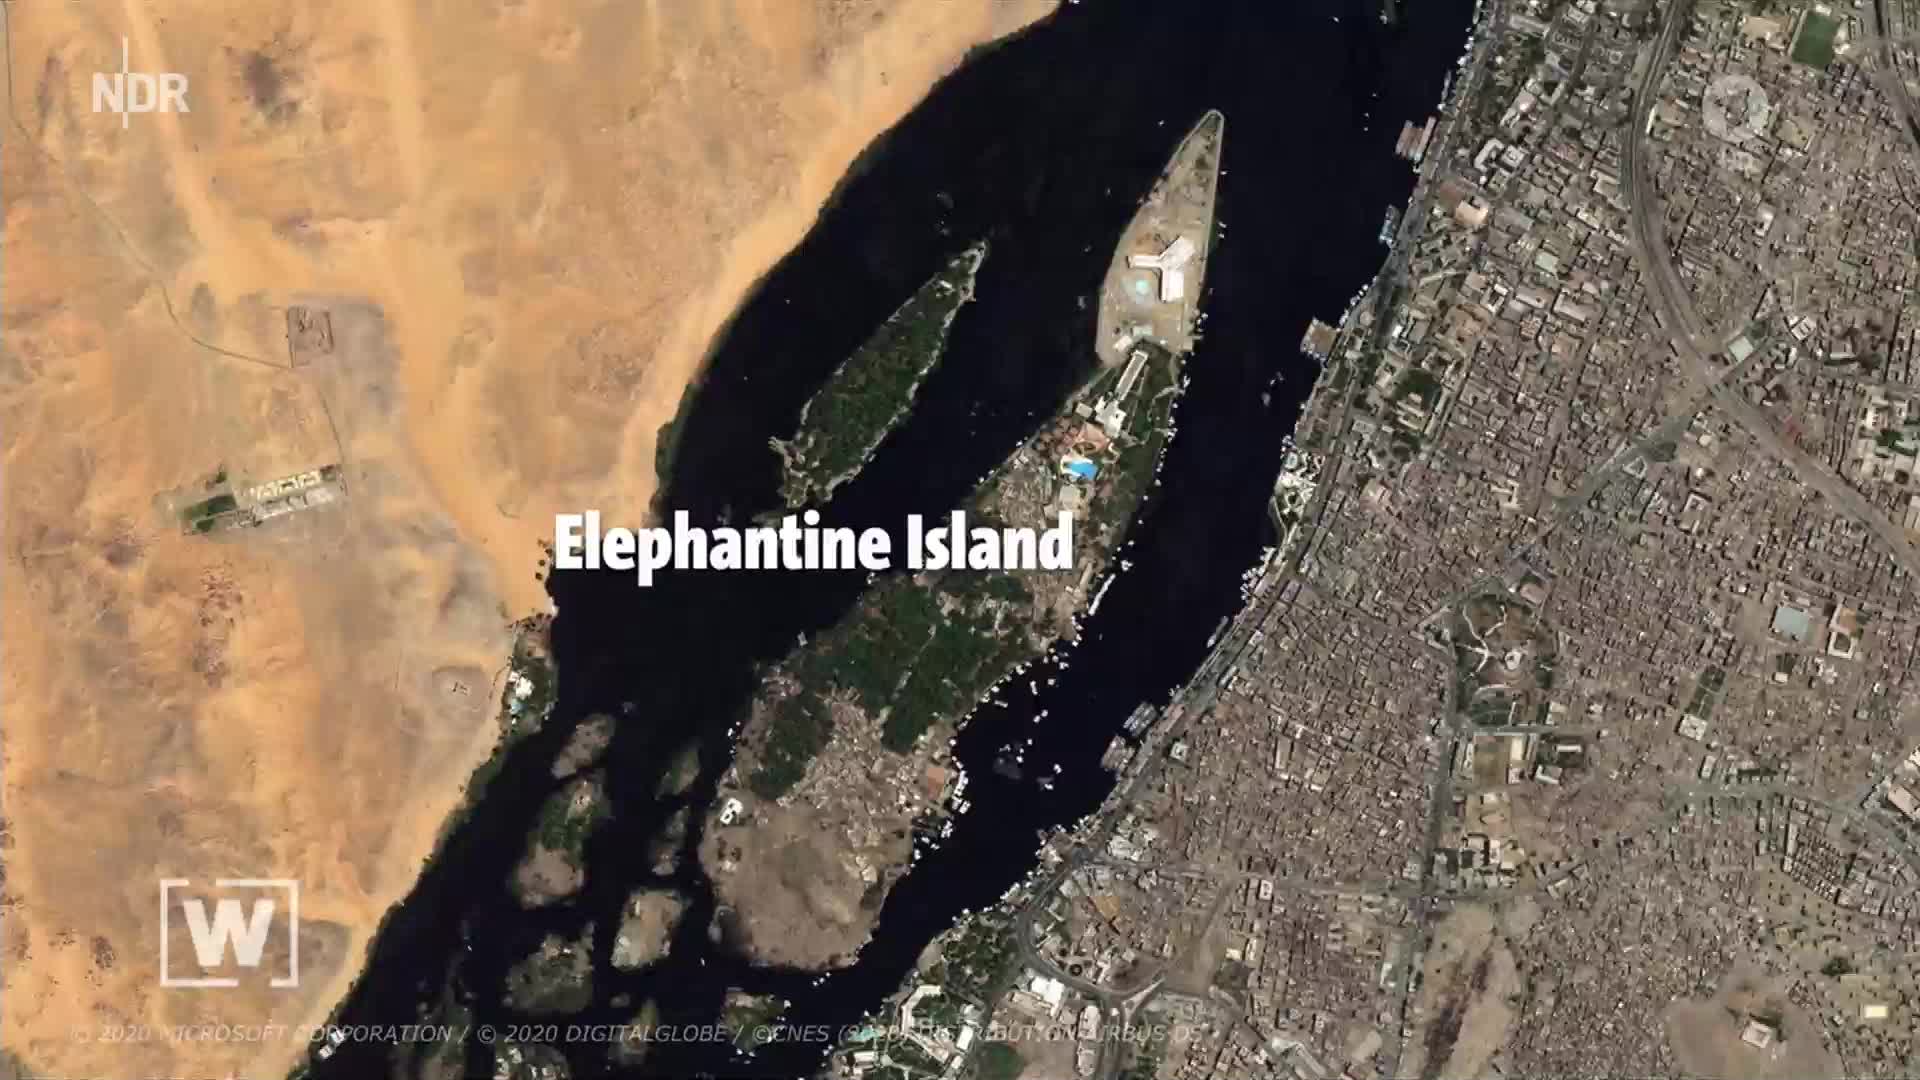  Elephantine. Localizing 4000 years of cultural history in Egypt